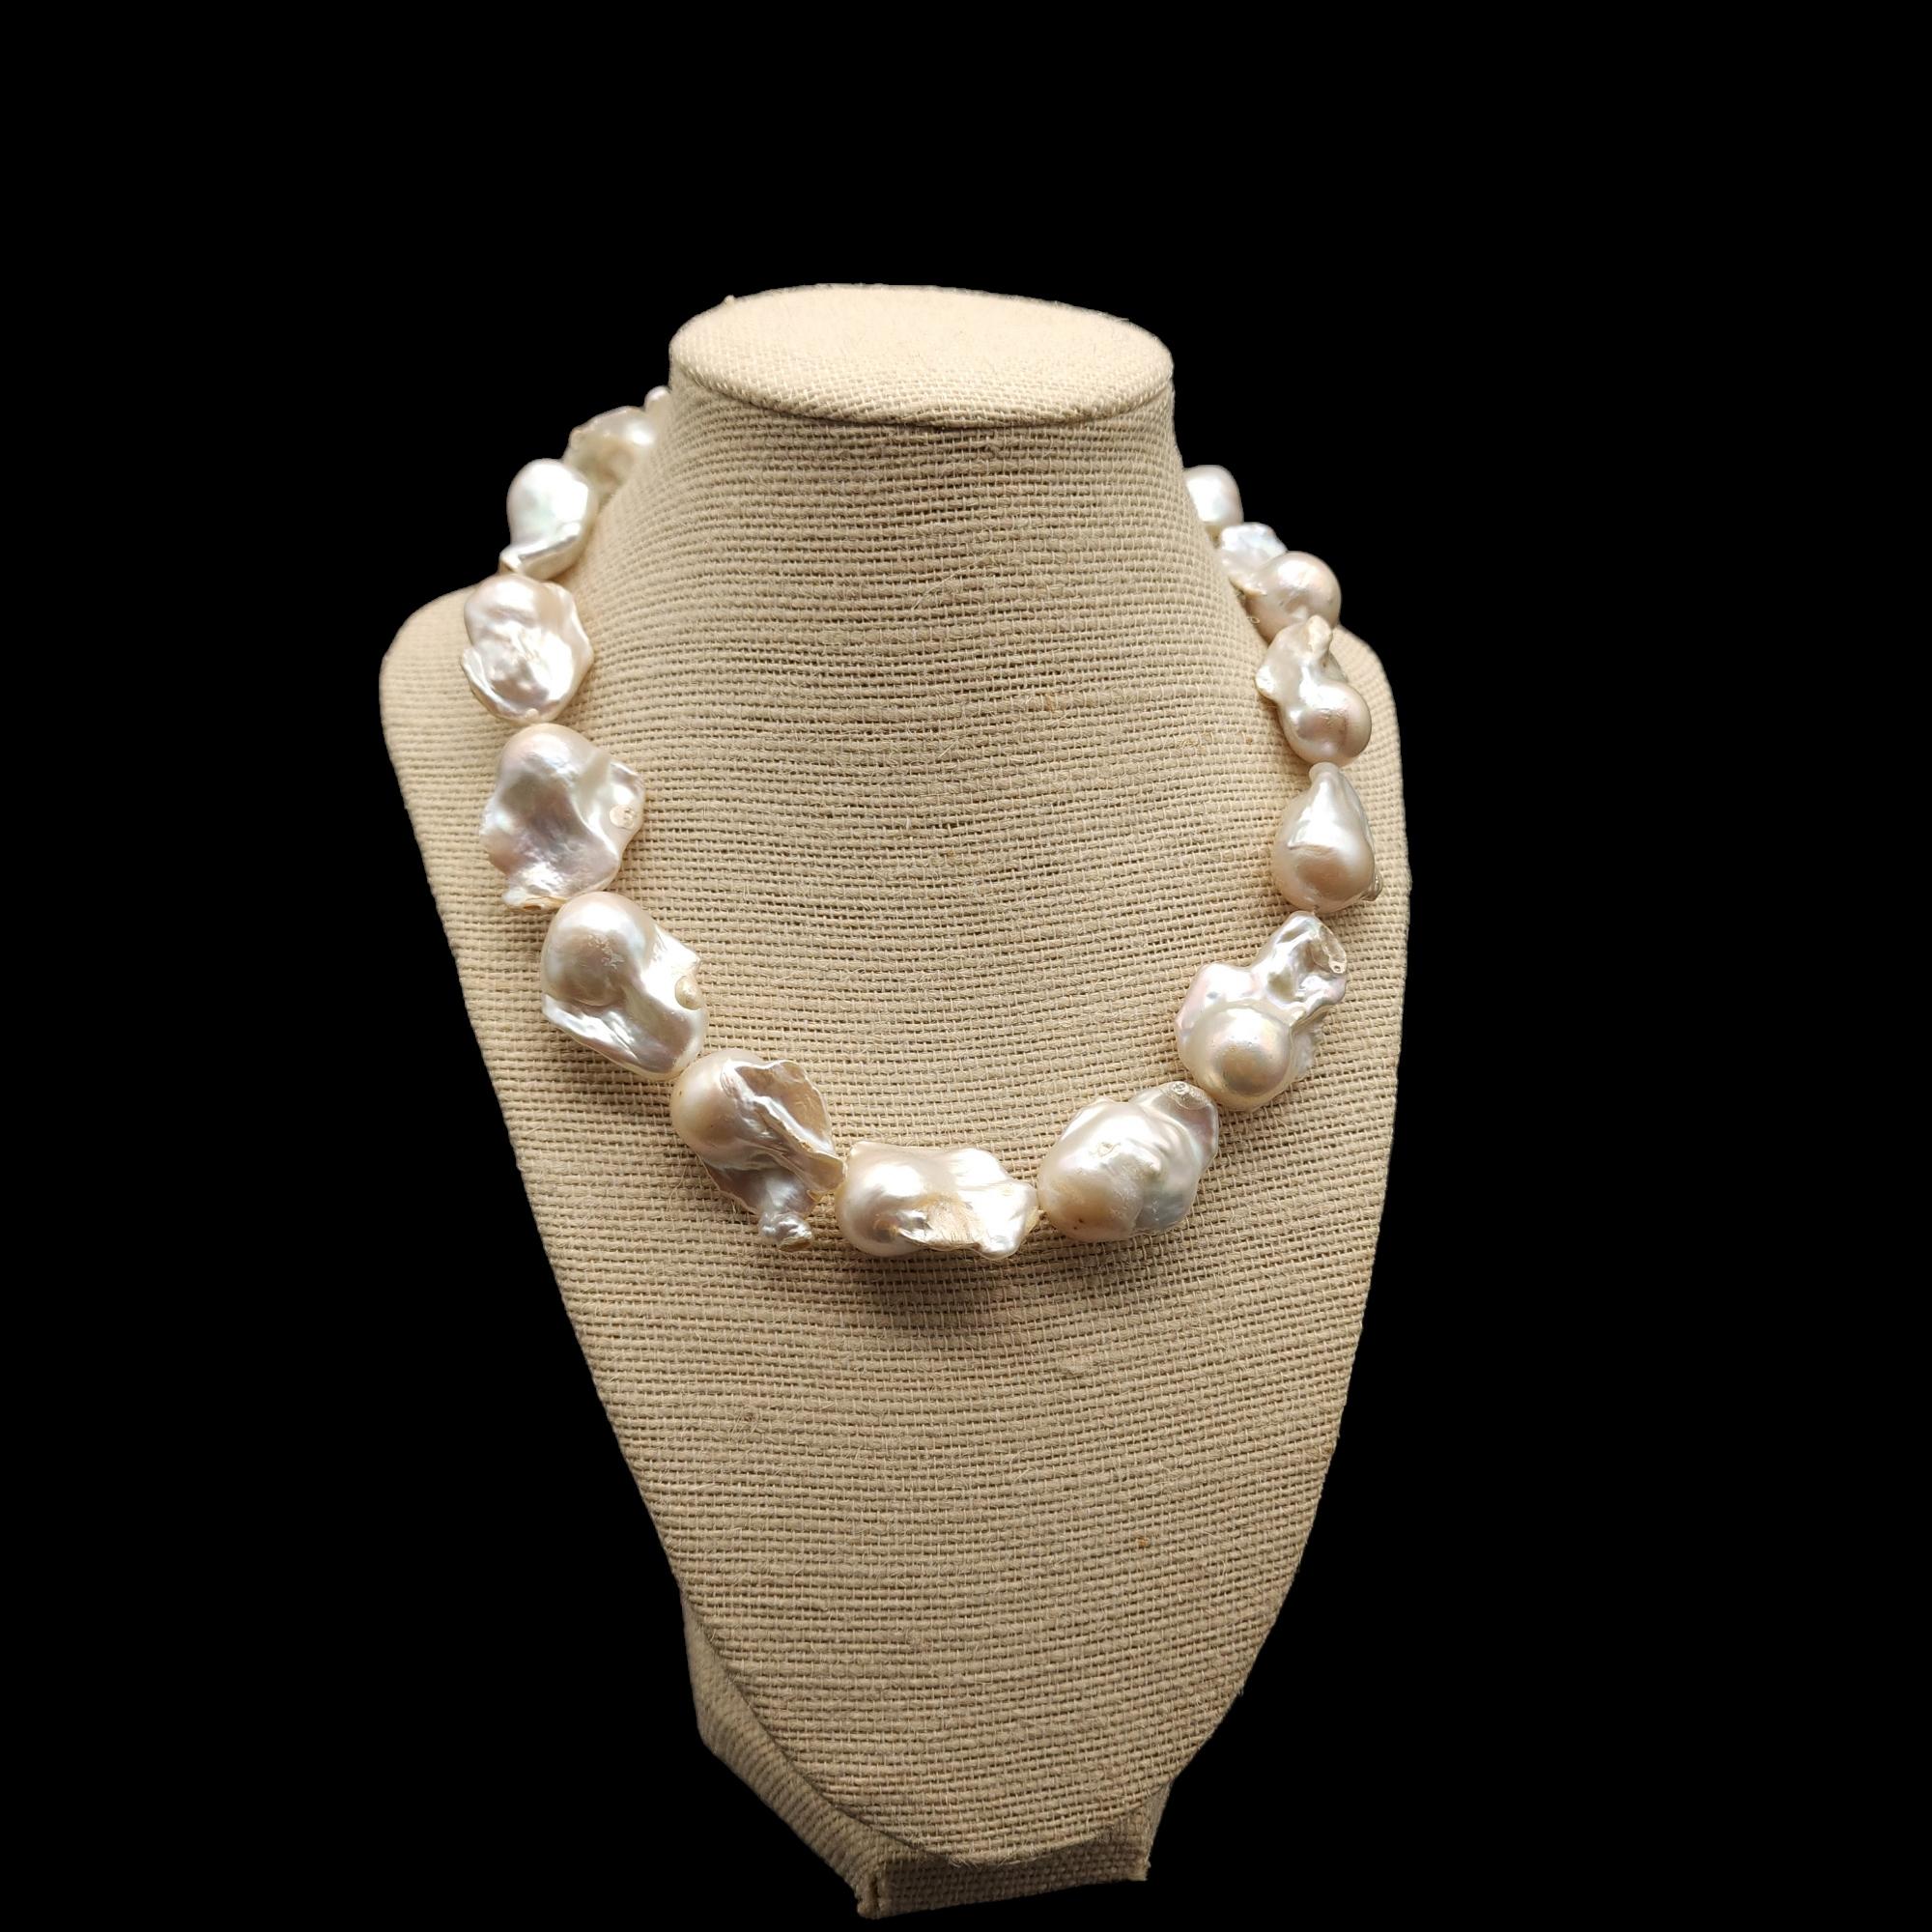 Accentuate your natural beauty with the glow of these genuine baroque pearls, each one perfectly unique!

Baroque pearl choker-length necklace with a sterling silver clasp.

Each pearl is approximately 1 1/8 inches by 3/4 to 1 inches.

Marks /